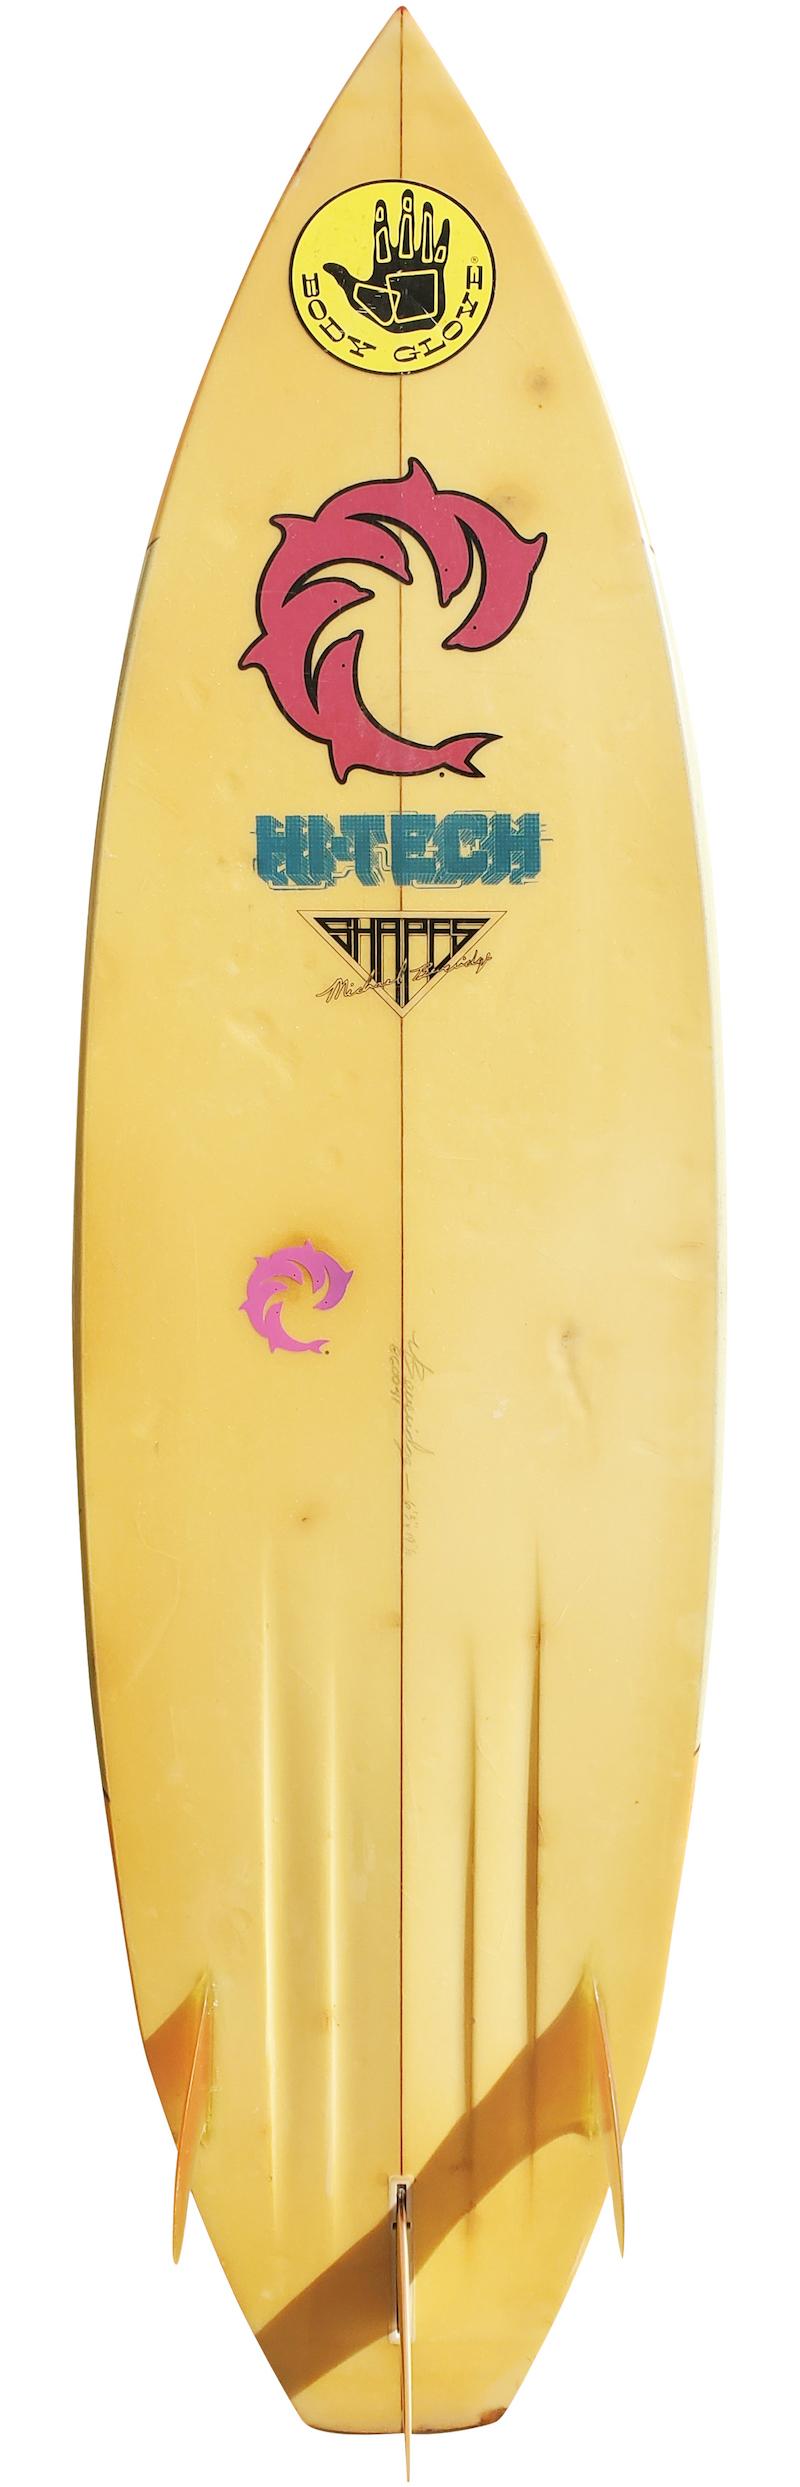 Mid-1980s vintage wave riding vehicles (WRV) surfboard shaped by Mike Beveridge. Features a retro airbrush design on deck, channel bottom, and thruster (tri-fin) setup. A great example of a 1980s short board in all original condition.